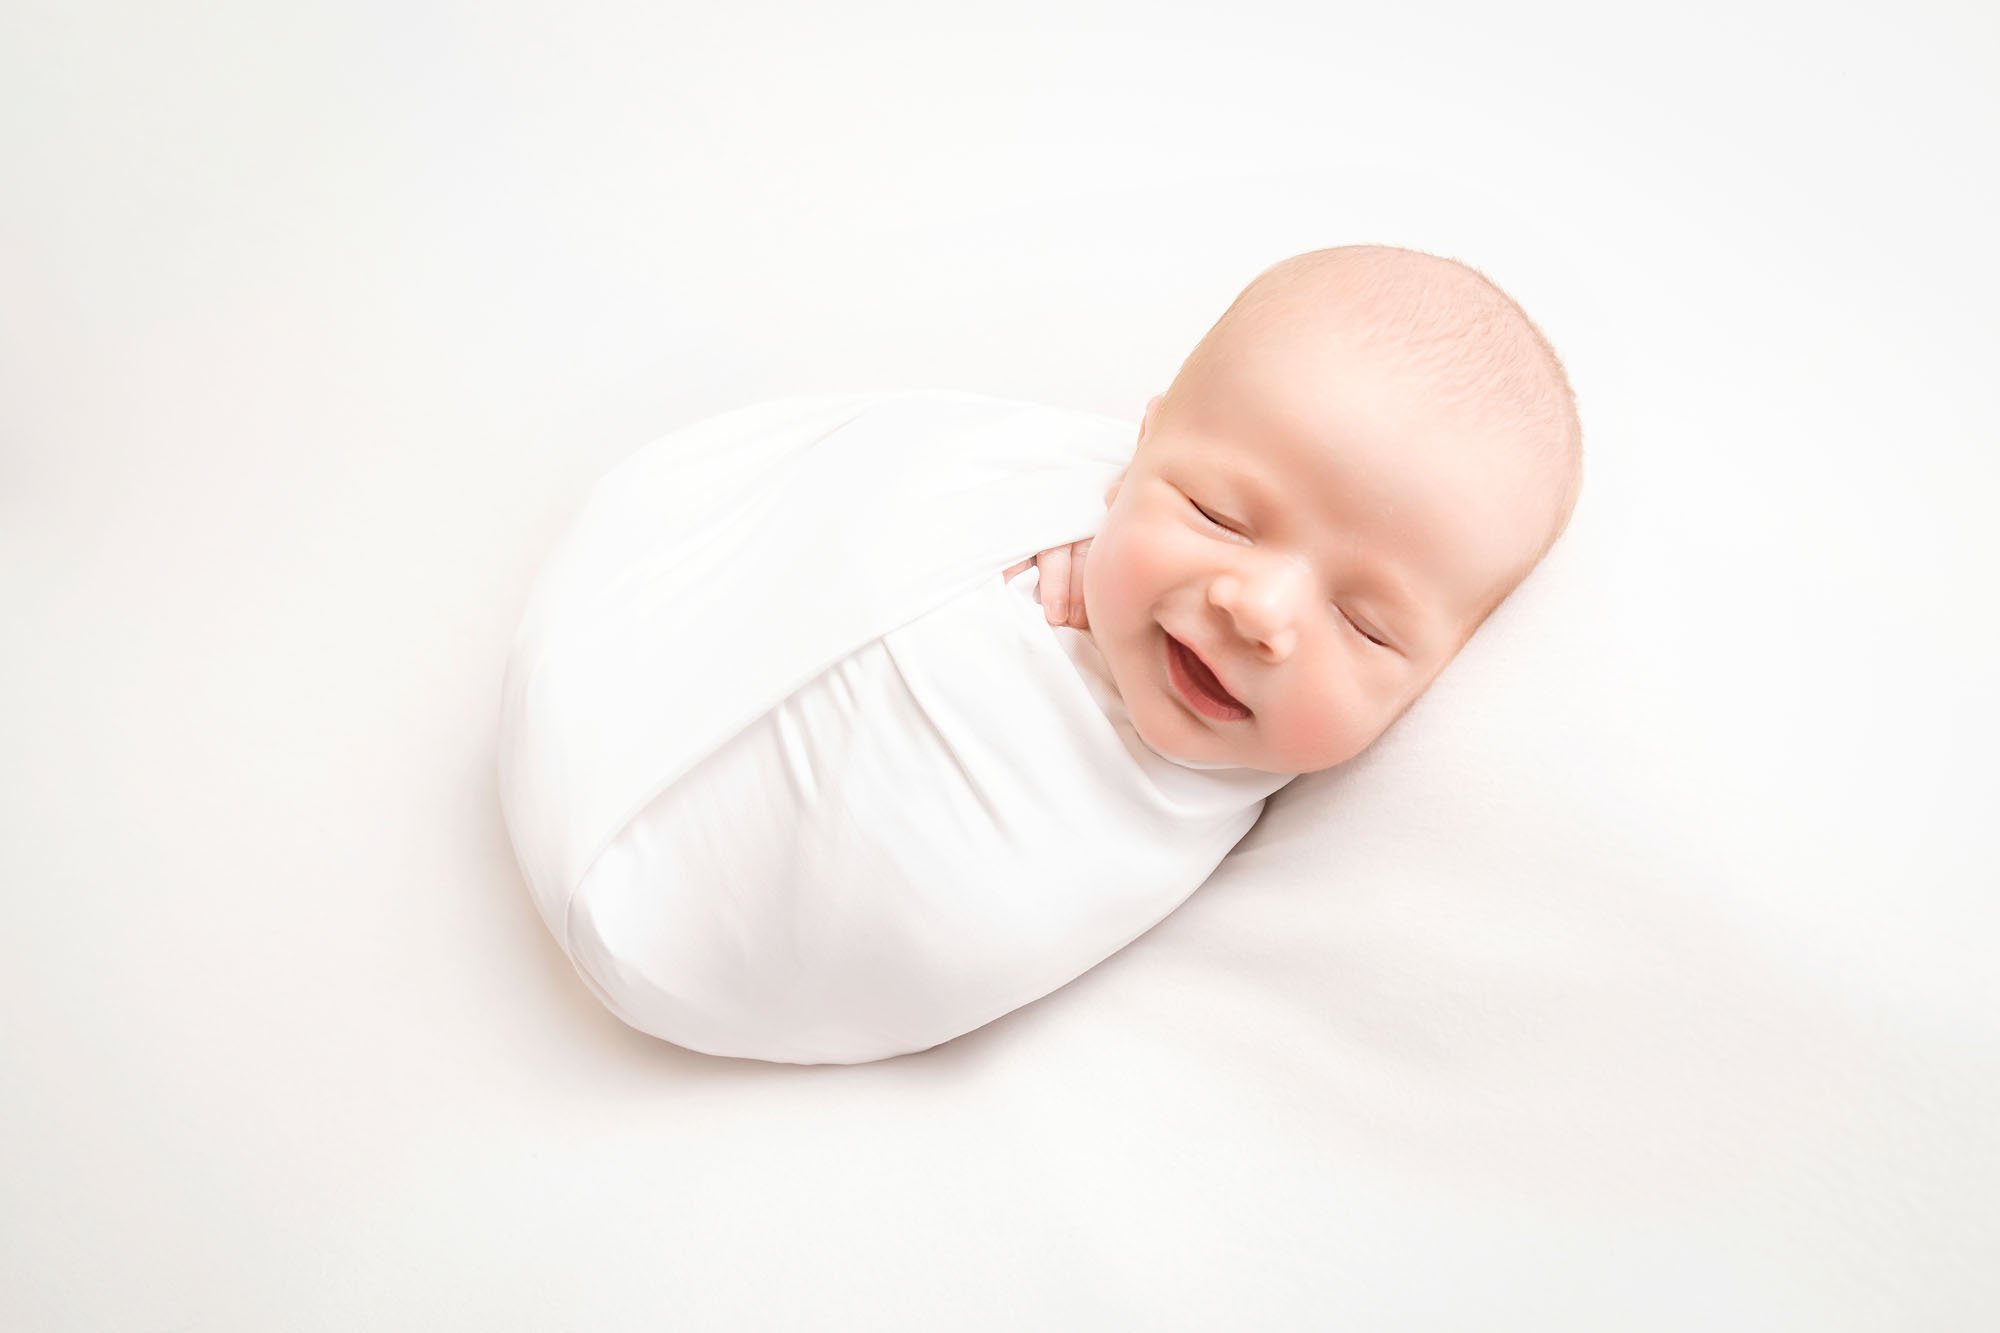 Newborn-photography-in-leeds-baby-swaddled-smiling.jpg